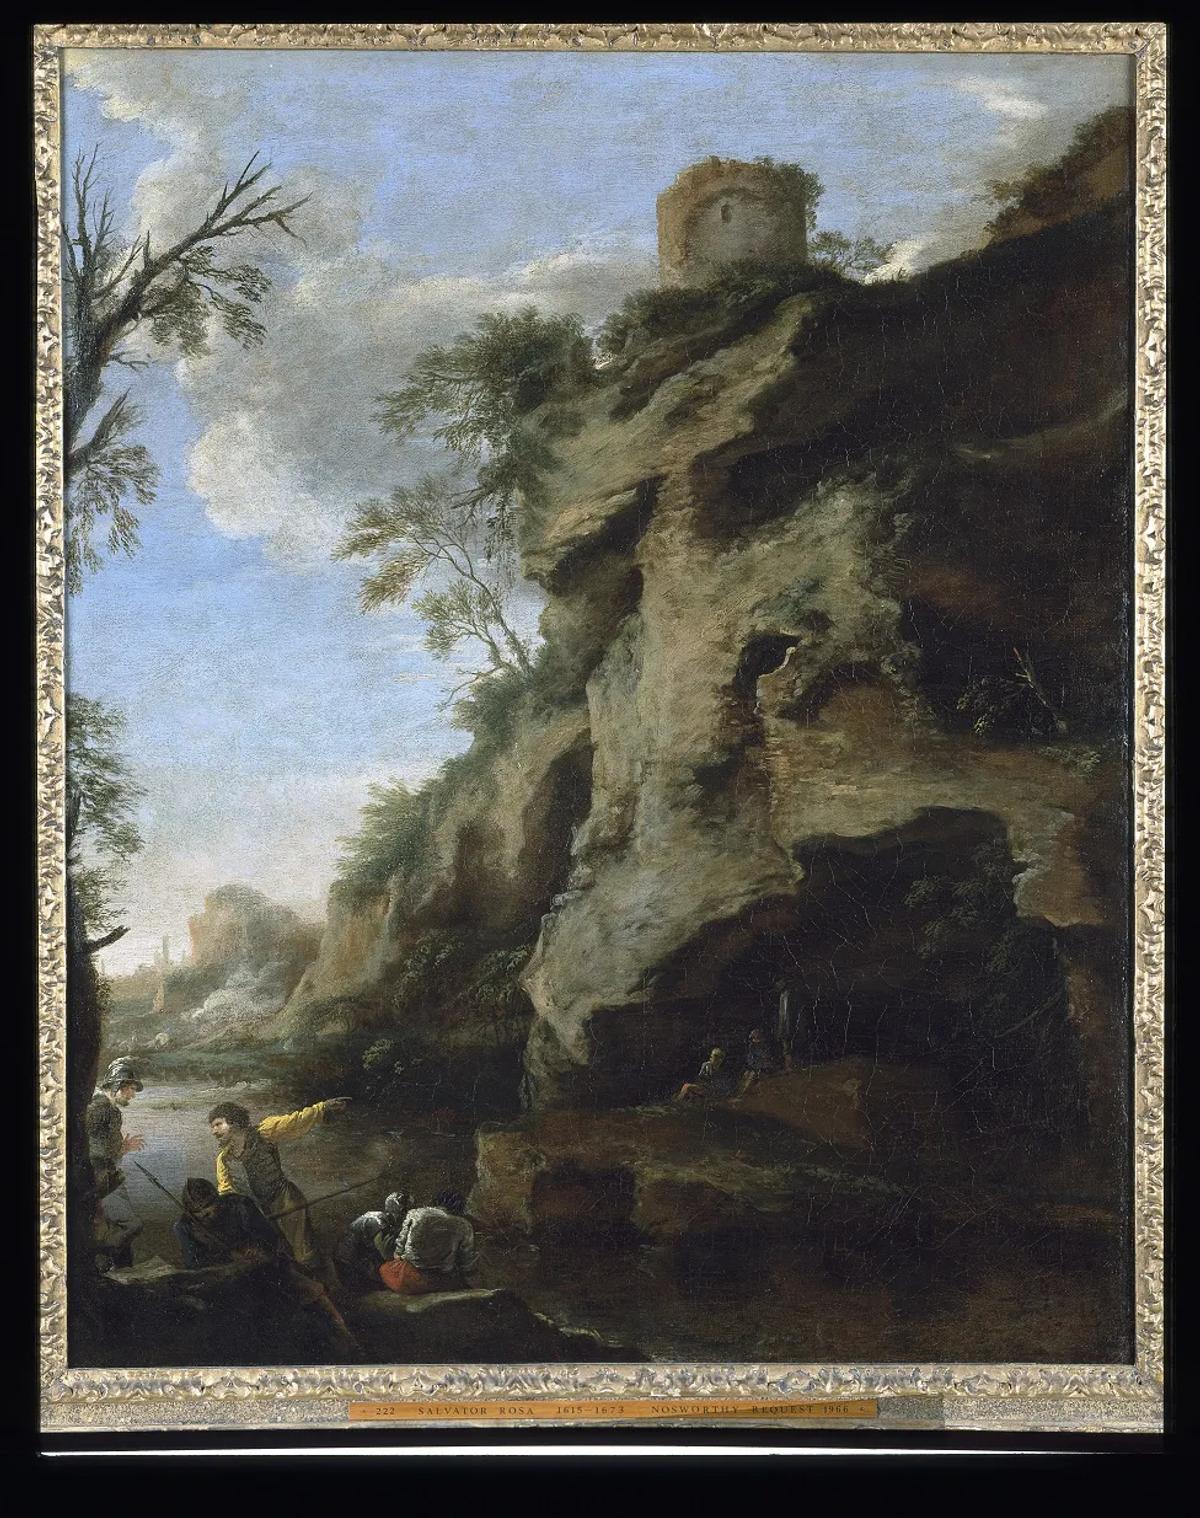 Salvator Rosa's A Rocky Coast, with Soldiers Studying a Plan (1640s) Christ Church Picture Gallery

